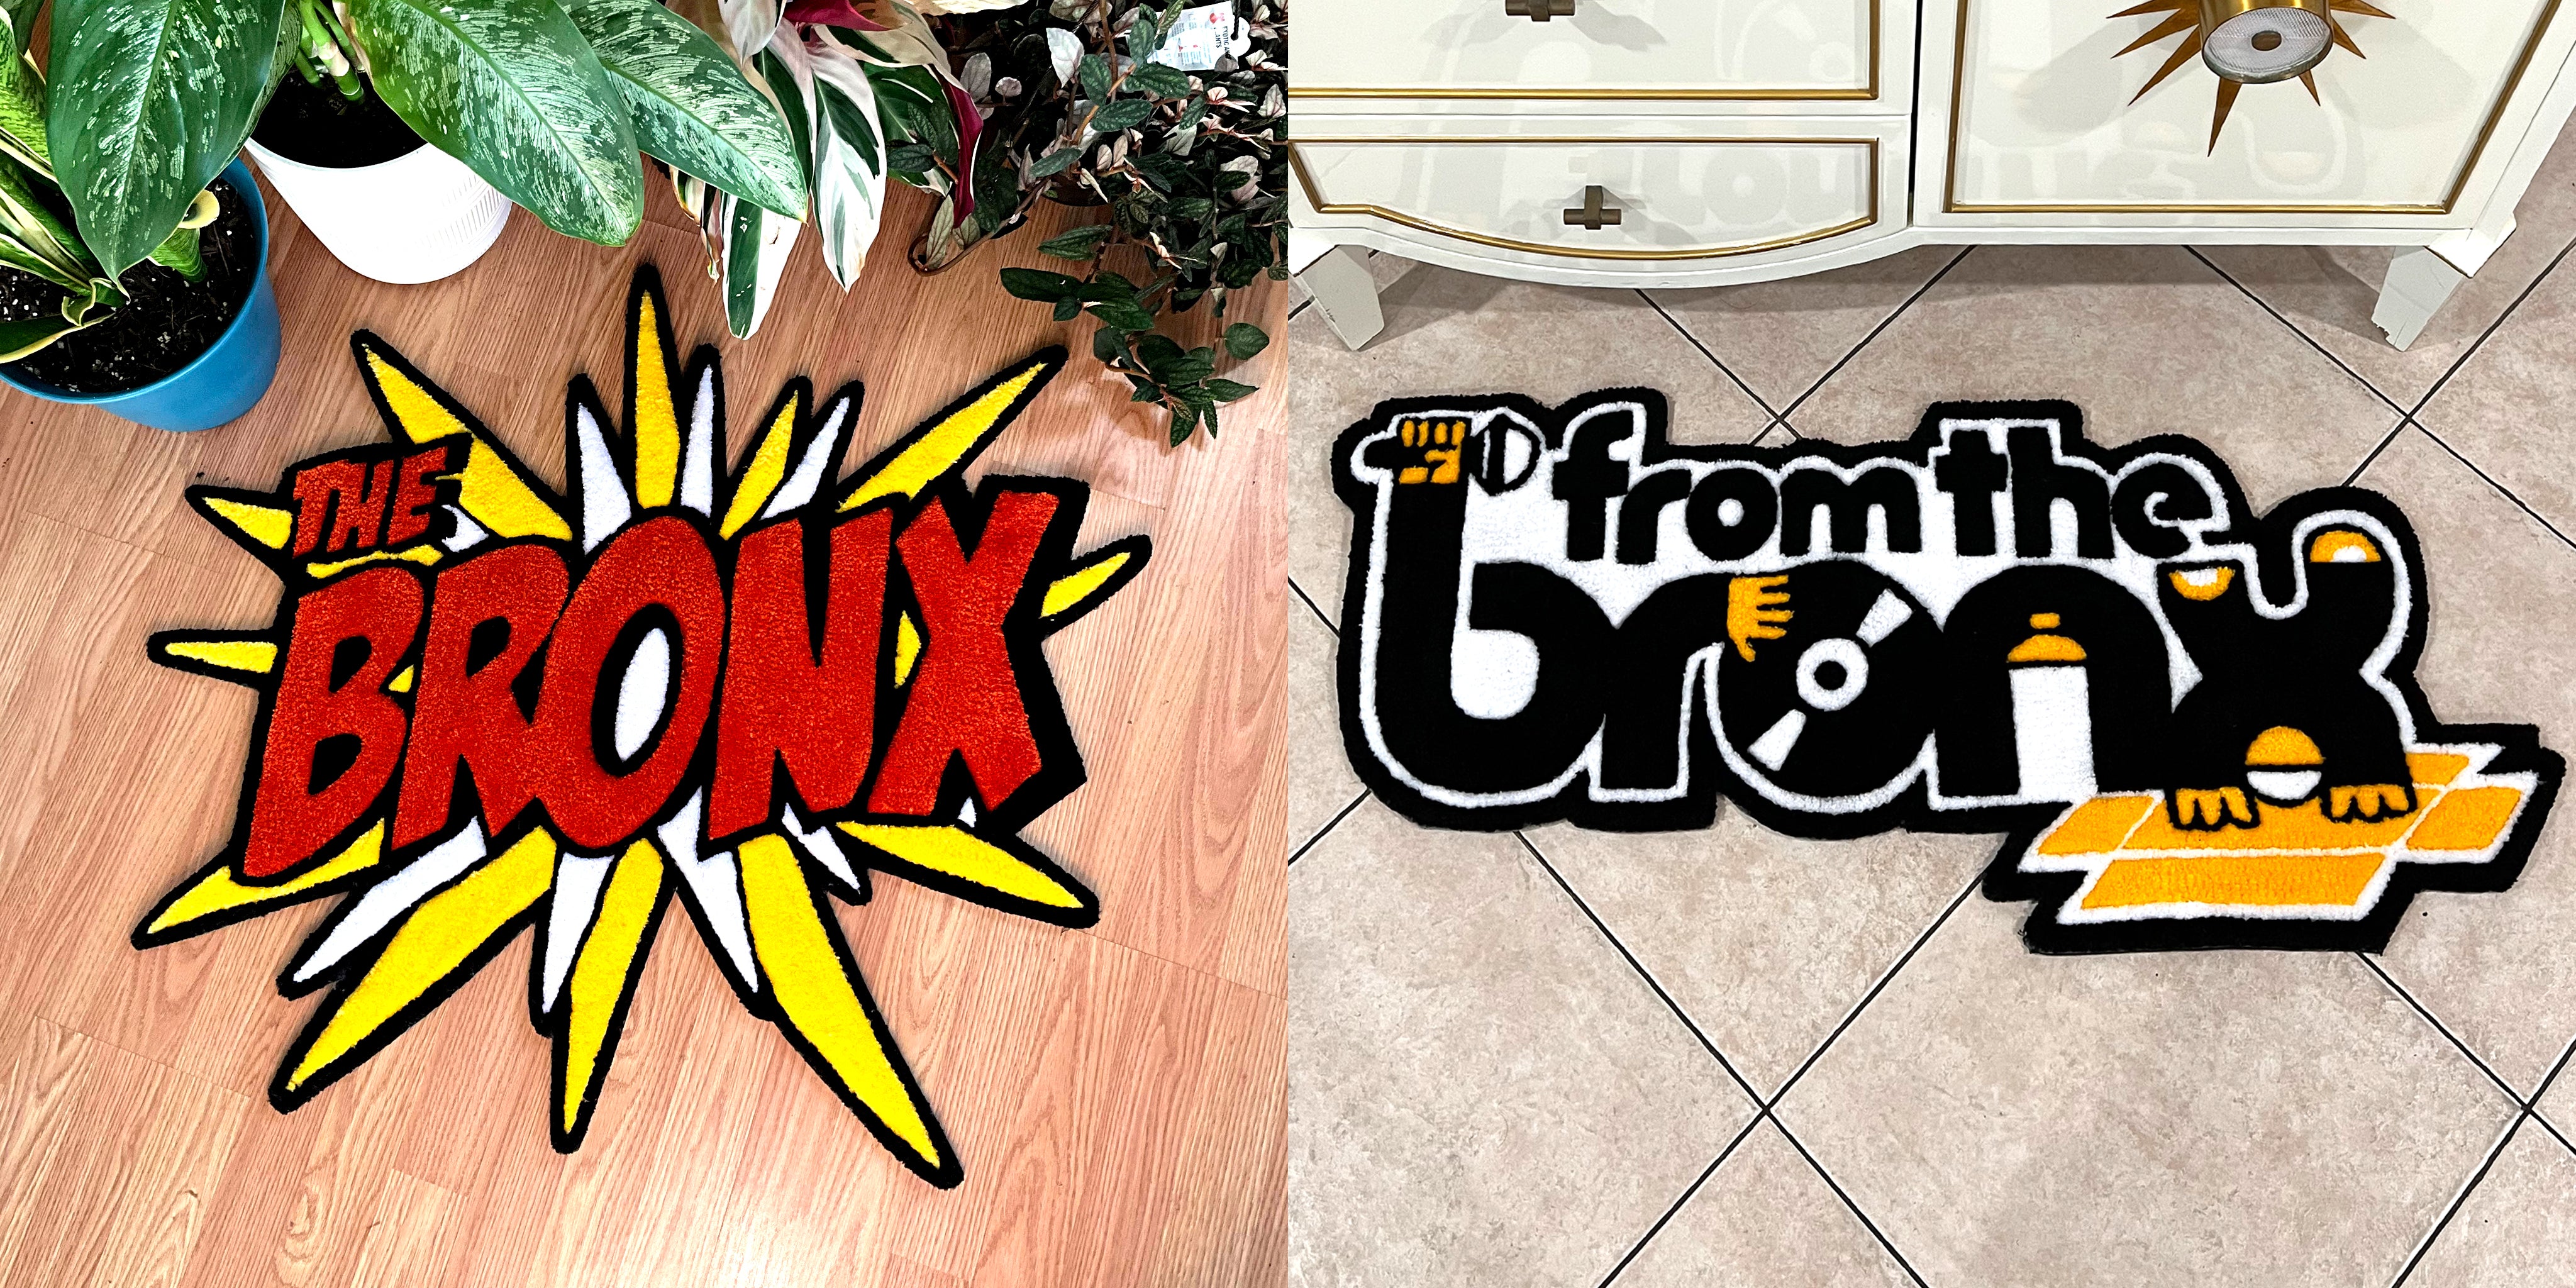 From L to R: Bronx POW! Rug & From The Bronx Logo Rug by Bodega Bloom